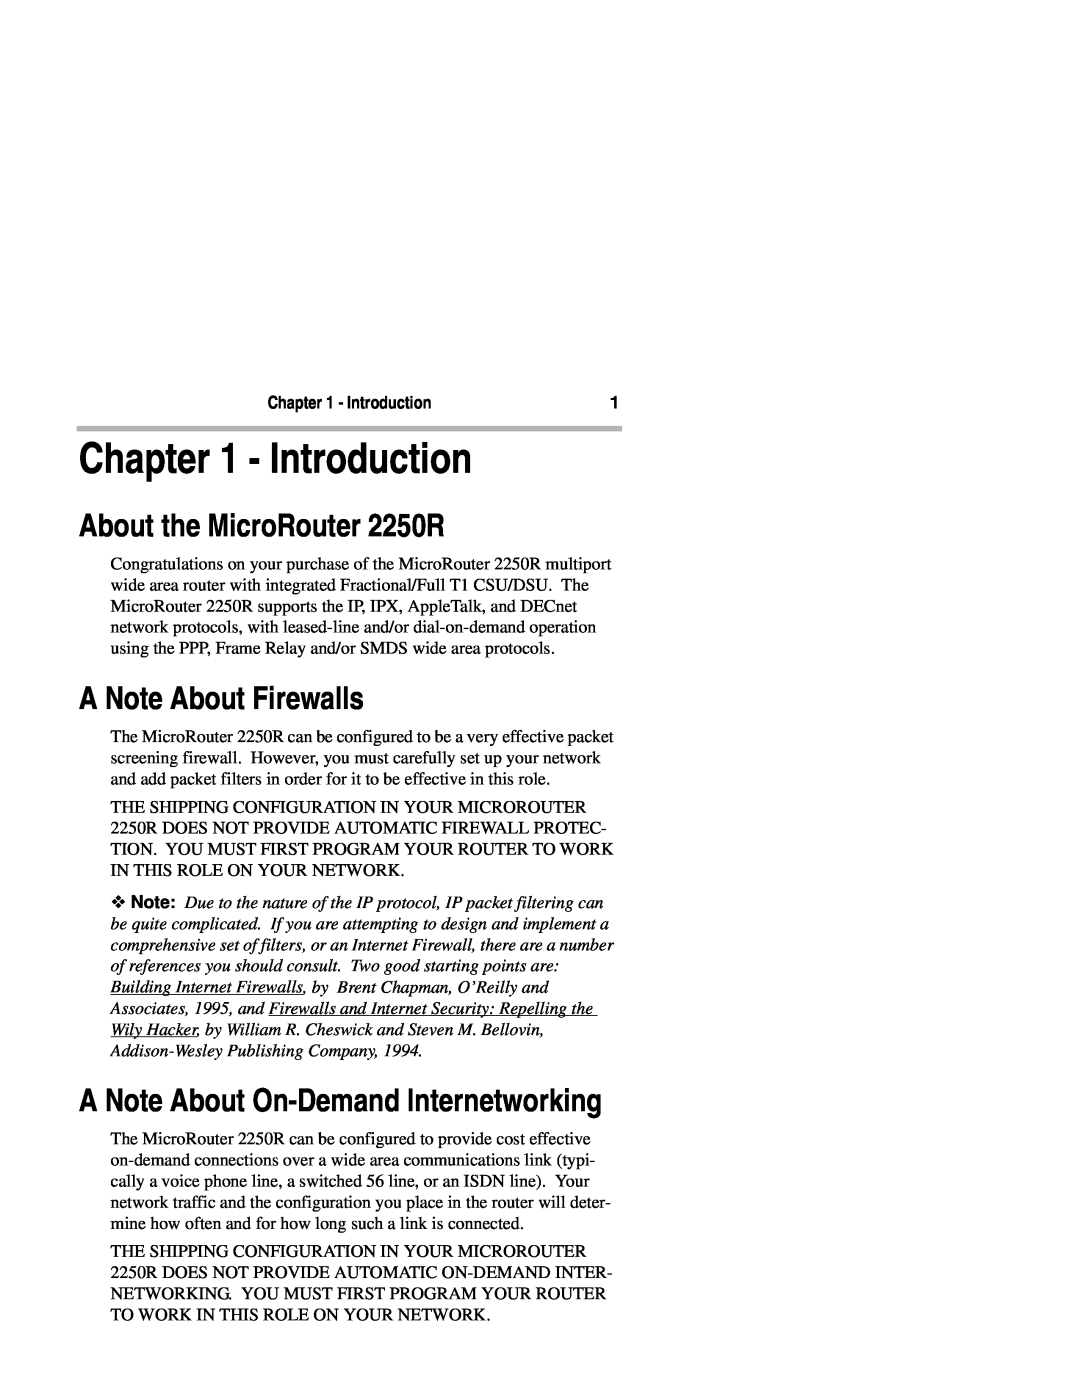 Compatible Systems manual Introduction, About the MicroRouter 2250R, A Note About Firewalls 